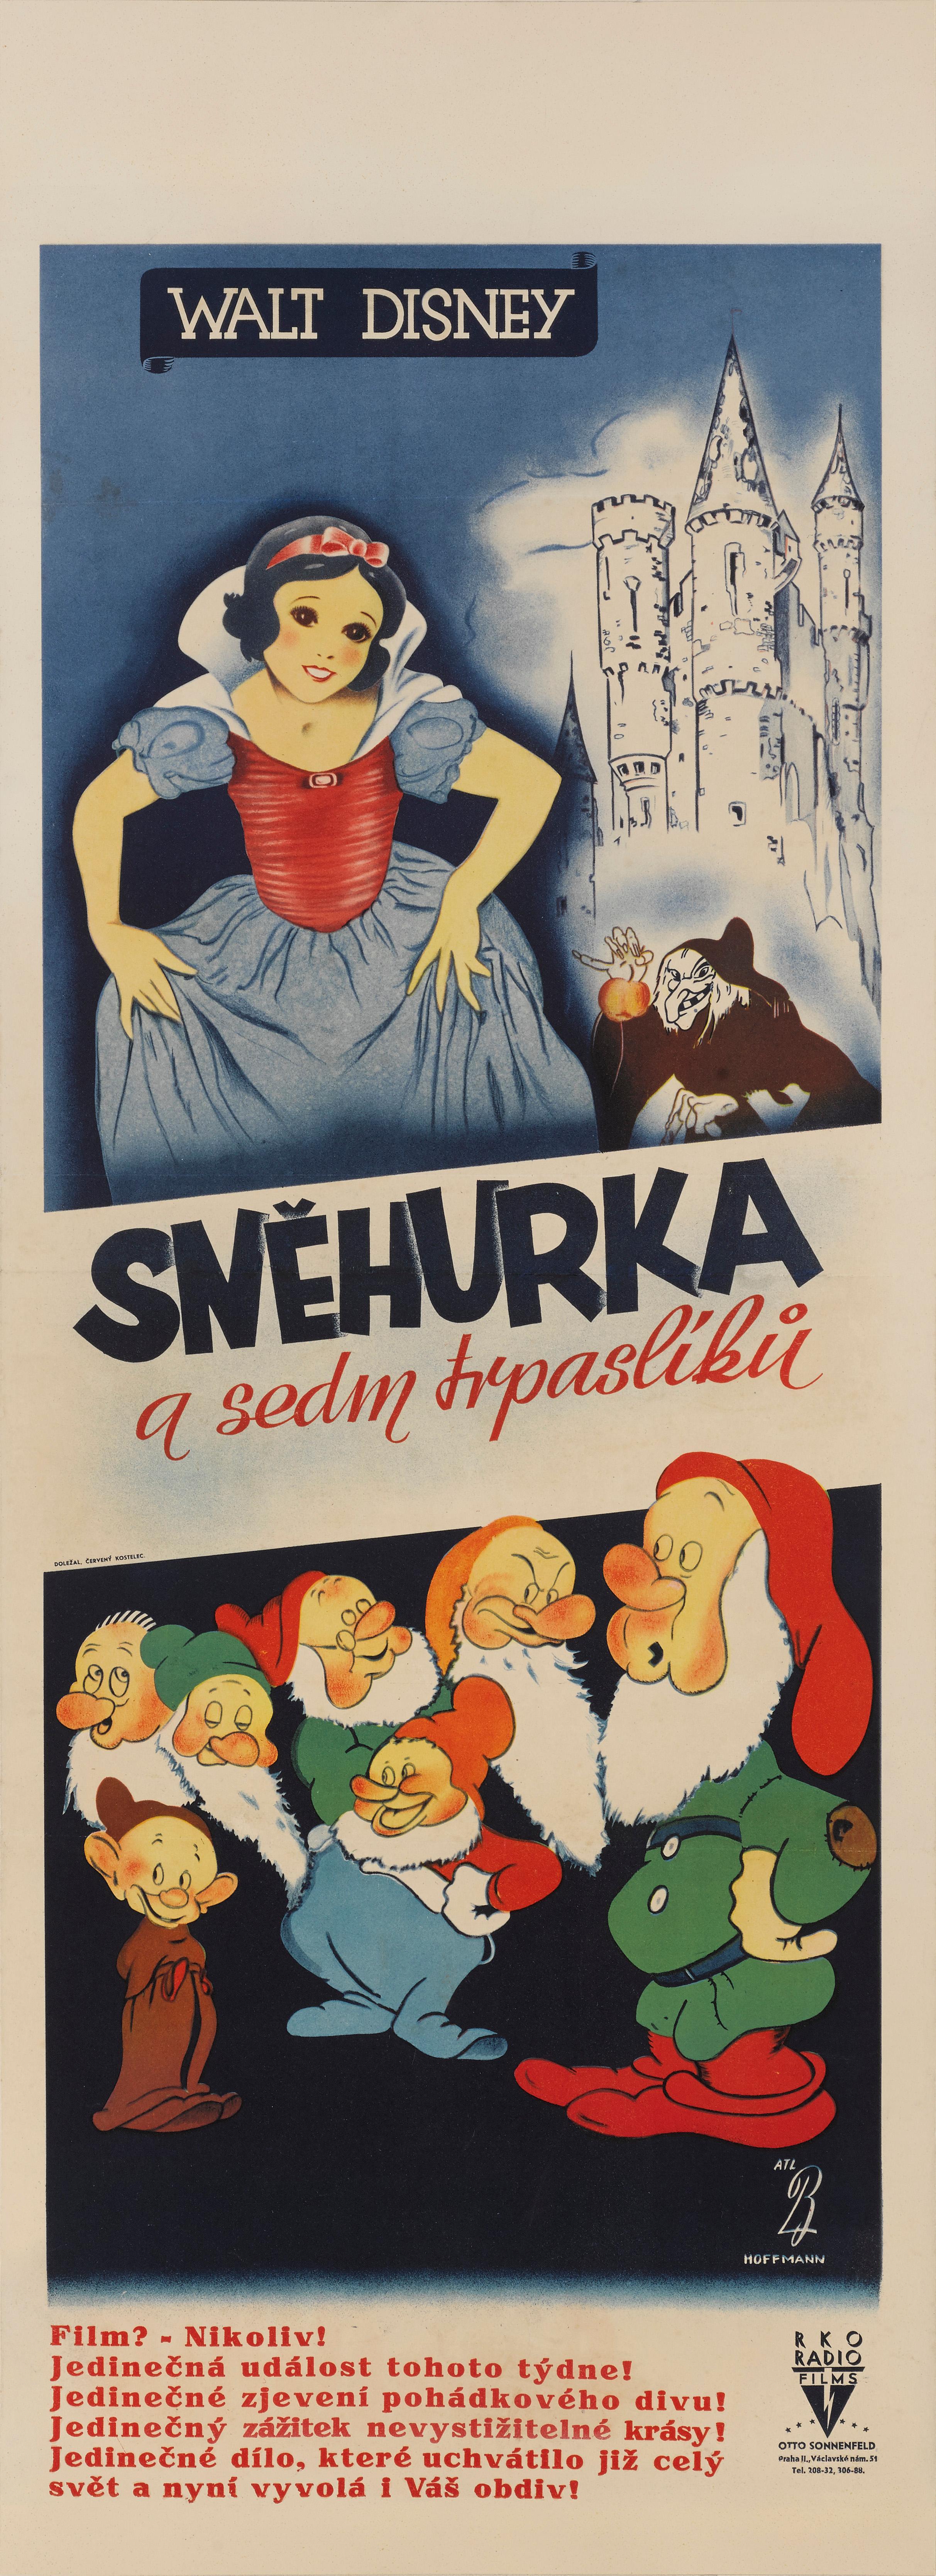 Original Czech film poster for the Snow White and the Seven Dwarfs .The artwork on this poster is unique to the films Czech release. The film was not released in Czechoslovakia until 1938. This was Walt Disney's first feature animation and when it